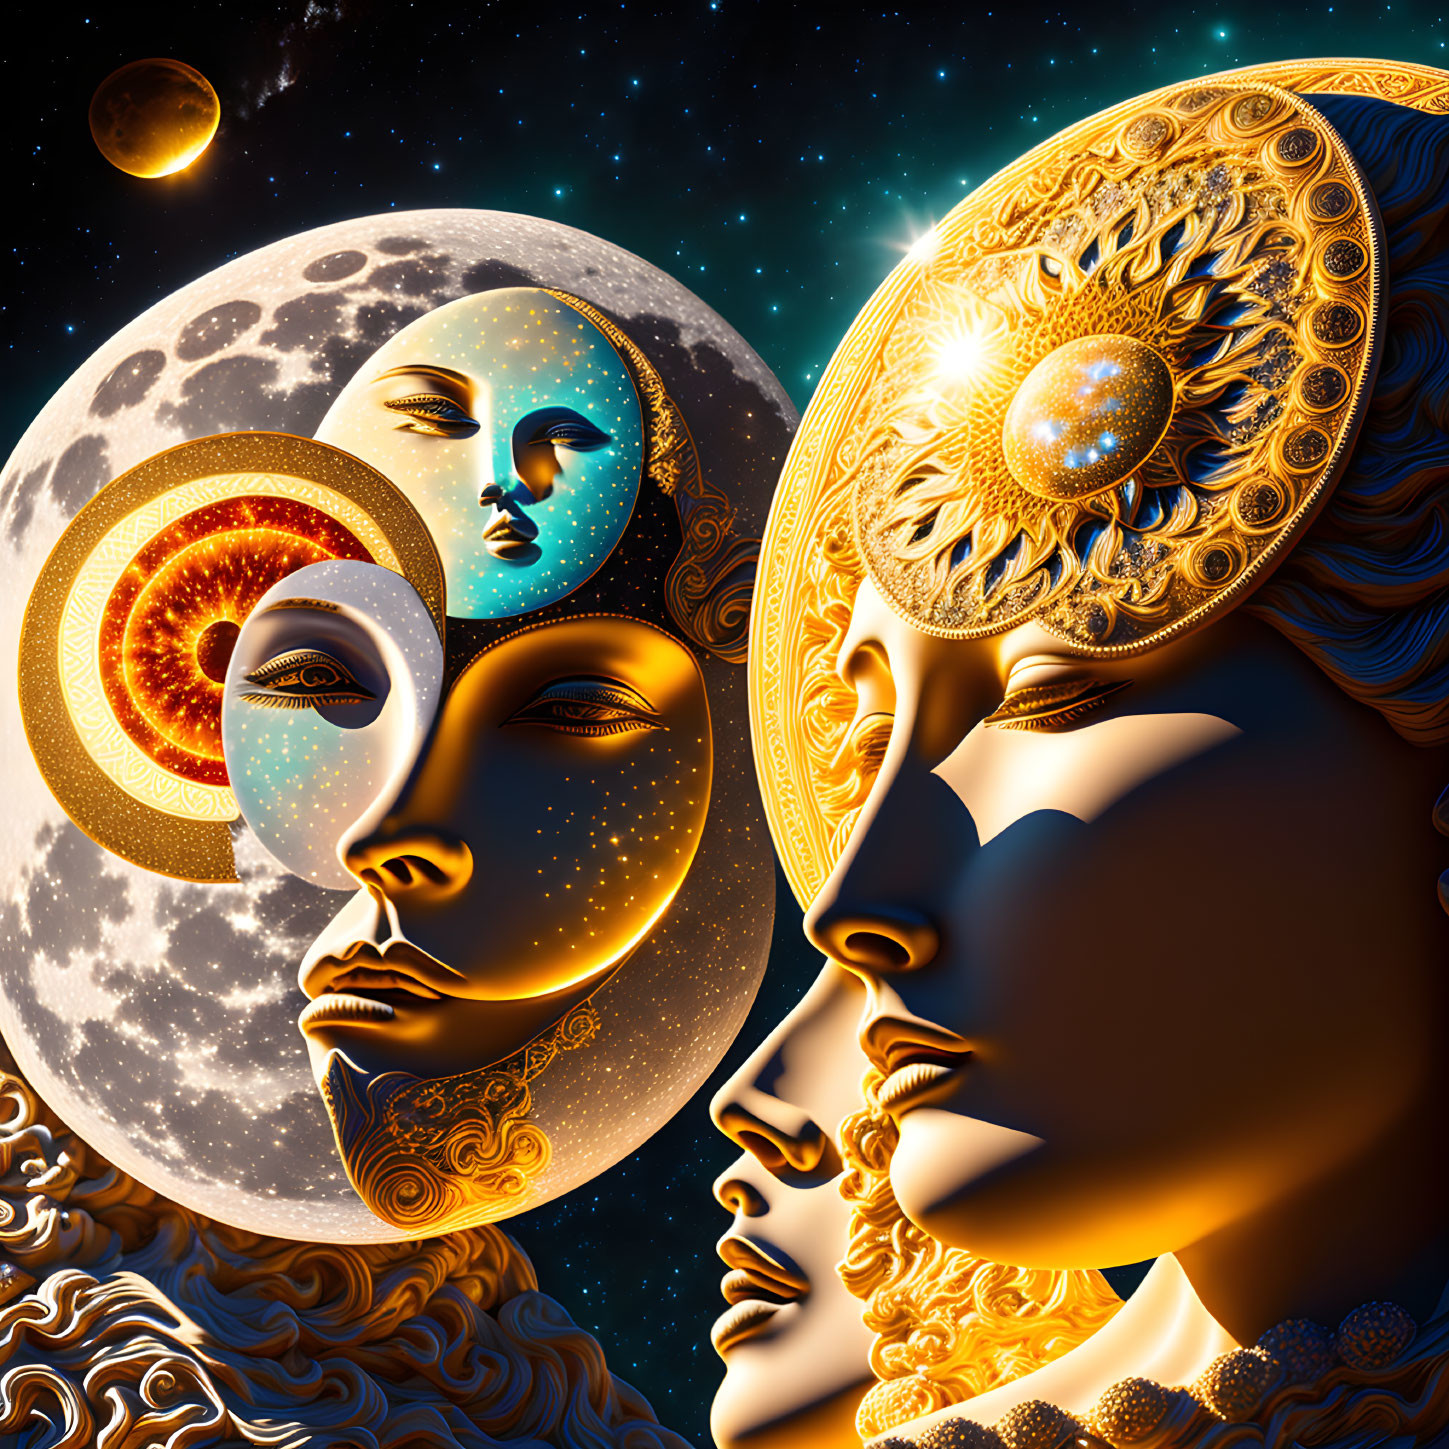 Surreal digital artwork: golden faces with celestial motifs in cosmic setting